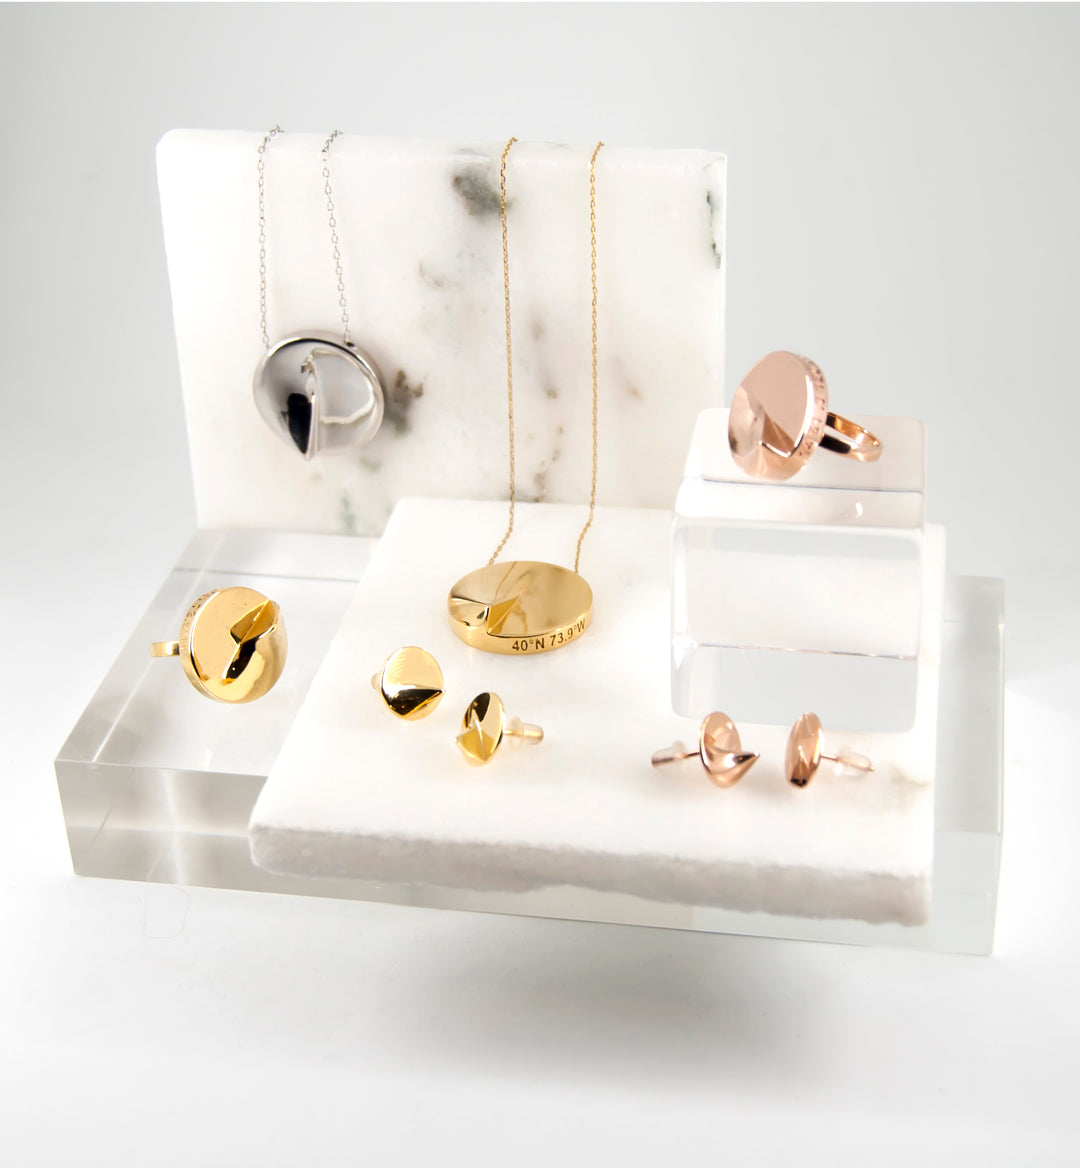 Heliodon jewelry collection in gold, rose gold and rhodium